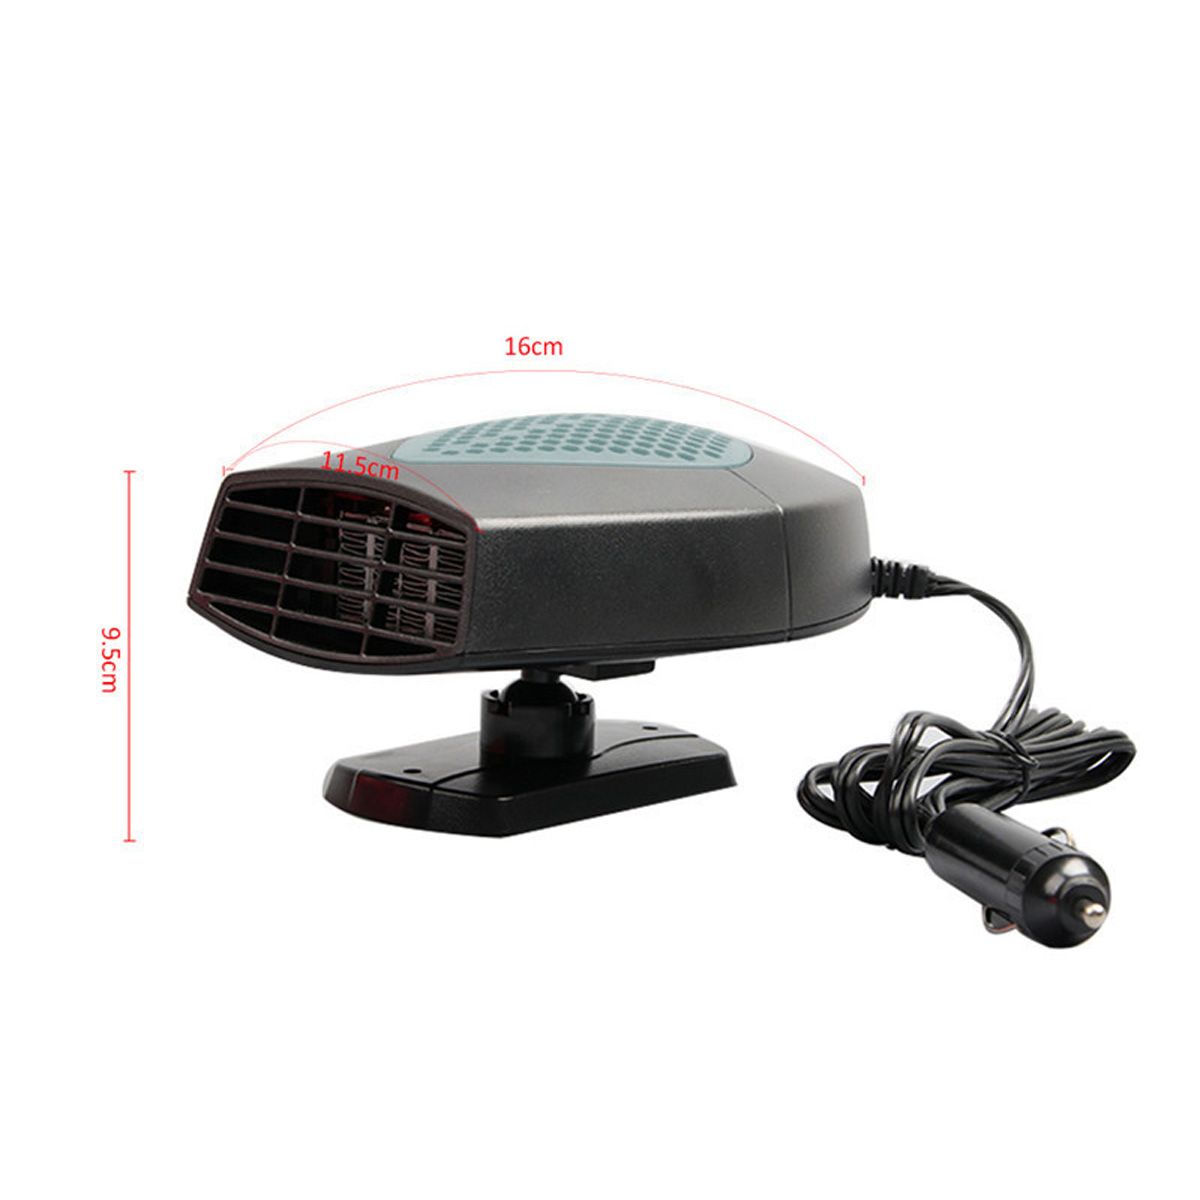 12V24V-Car-Defroster-Heater-3-In-1-Air-Purifier-Auto-Demister-Cooler-Dryer-Dehumidifiers-1599699